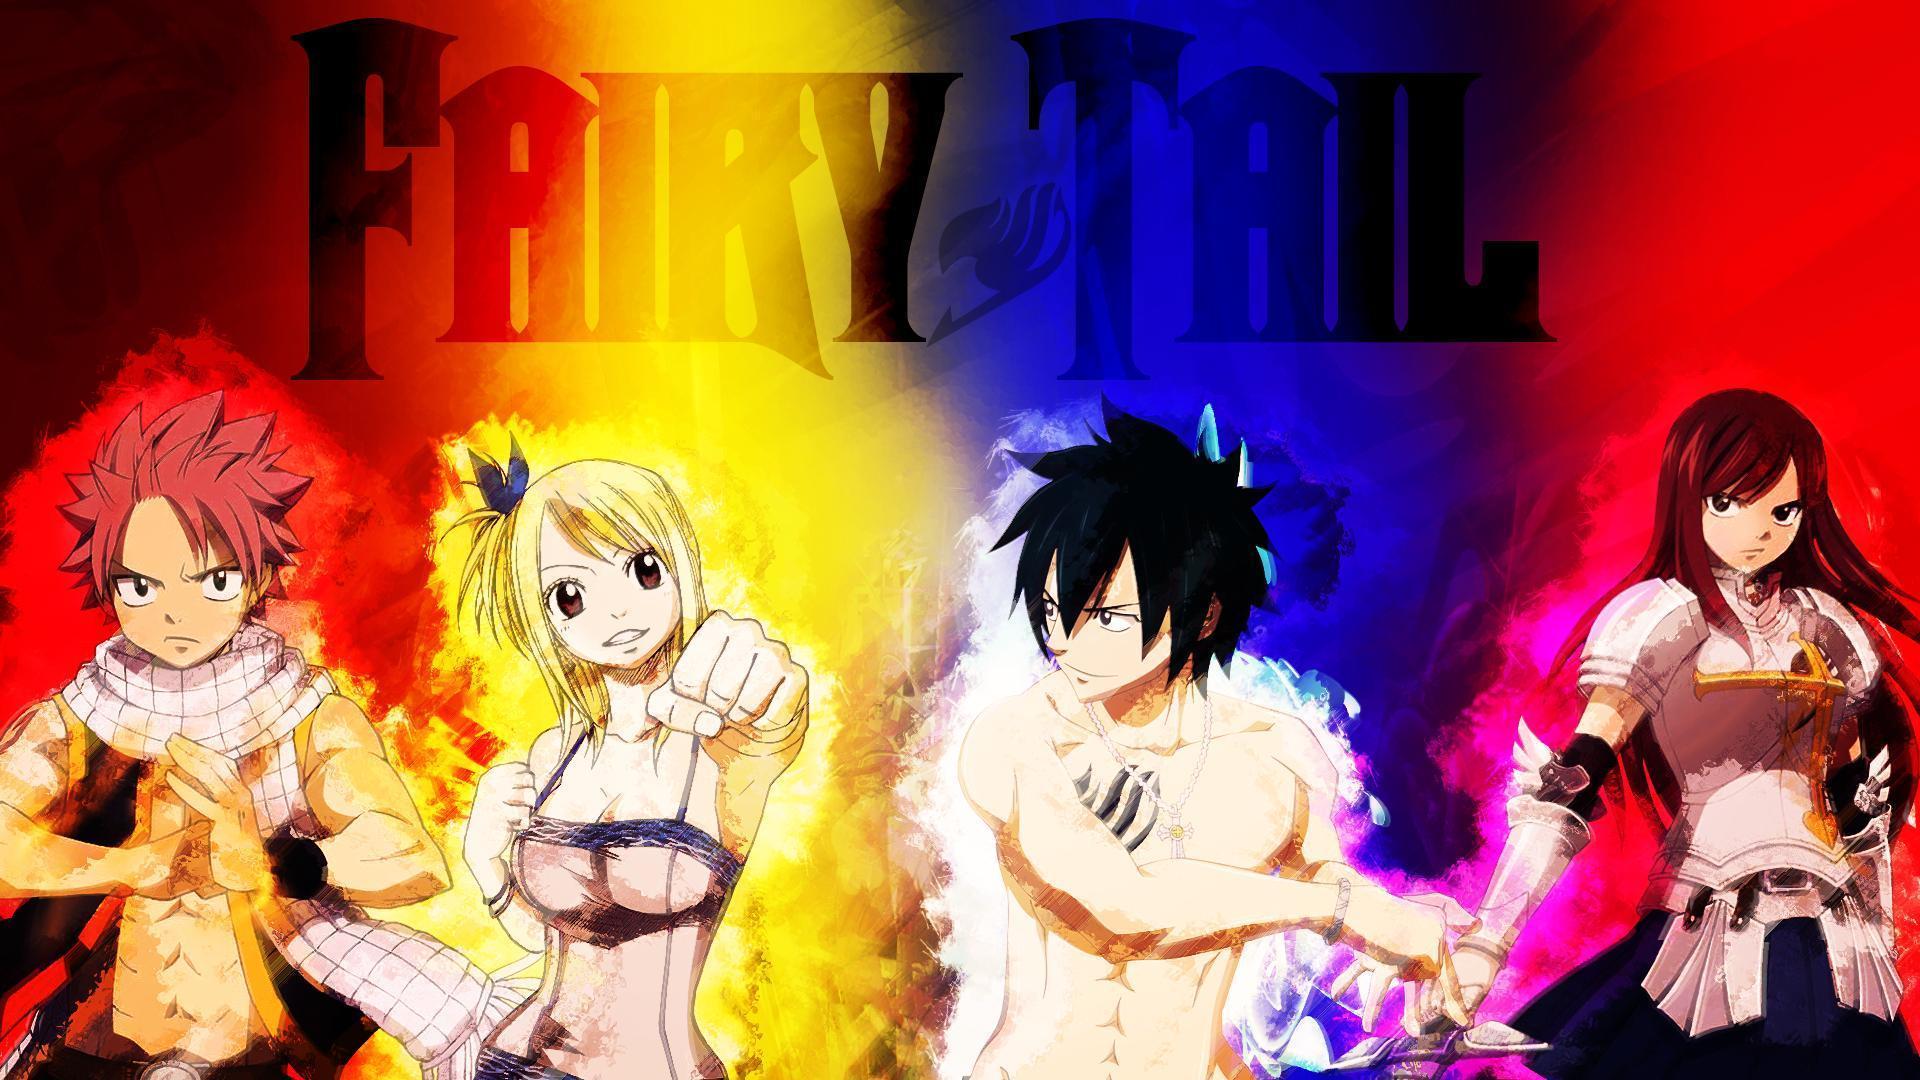 Fairy Tail Cartoon Anime Wallpapers Hd Wallpapers.